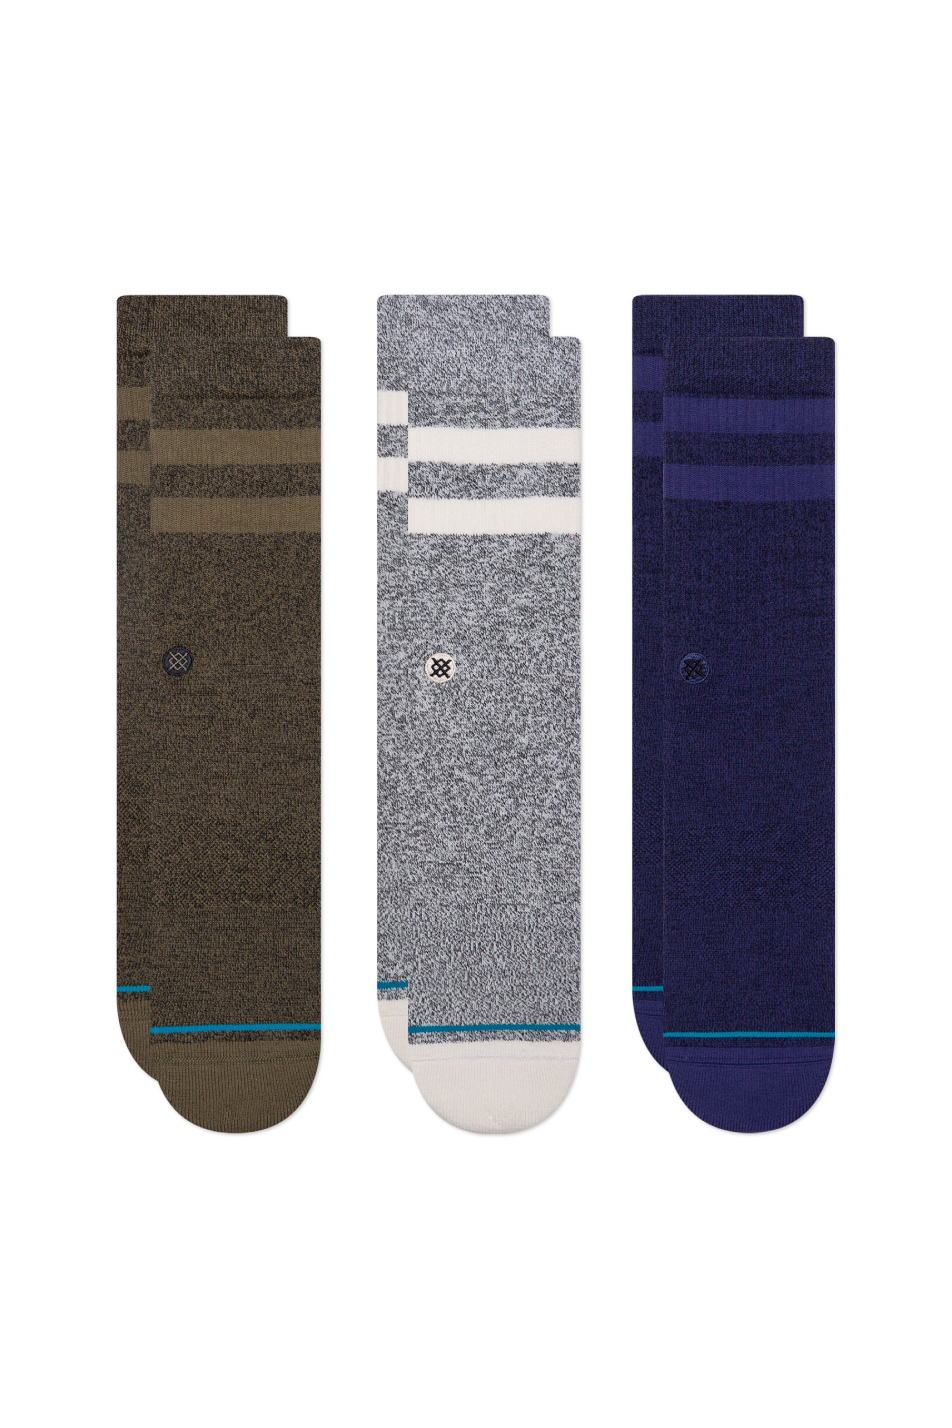 Stance Joven 3 Pack